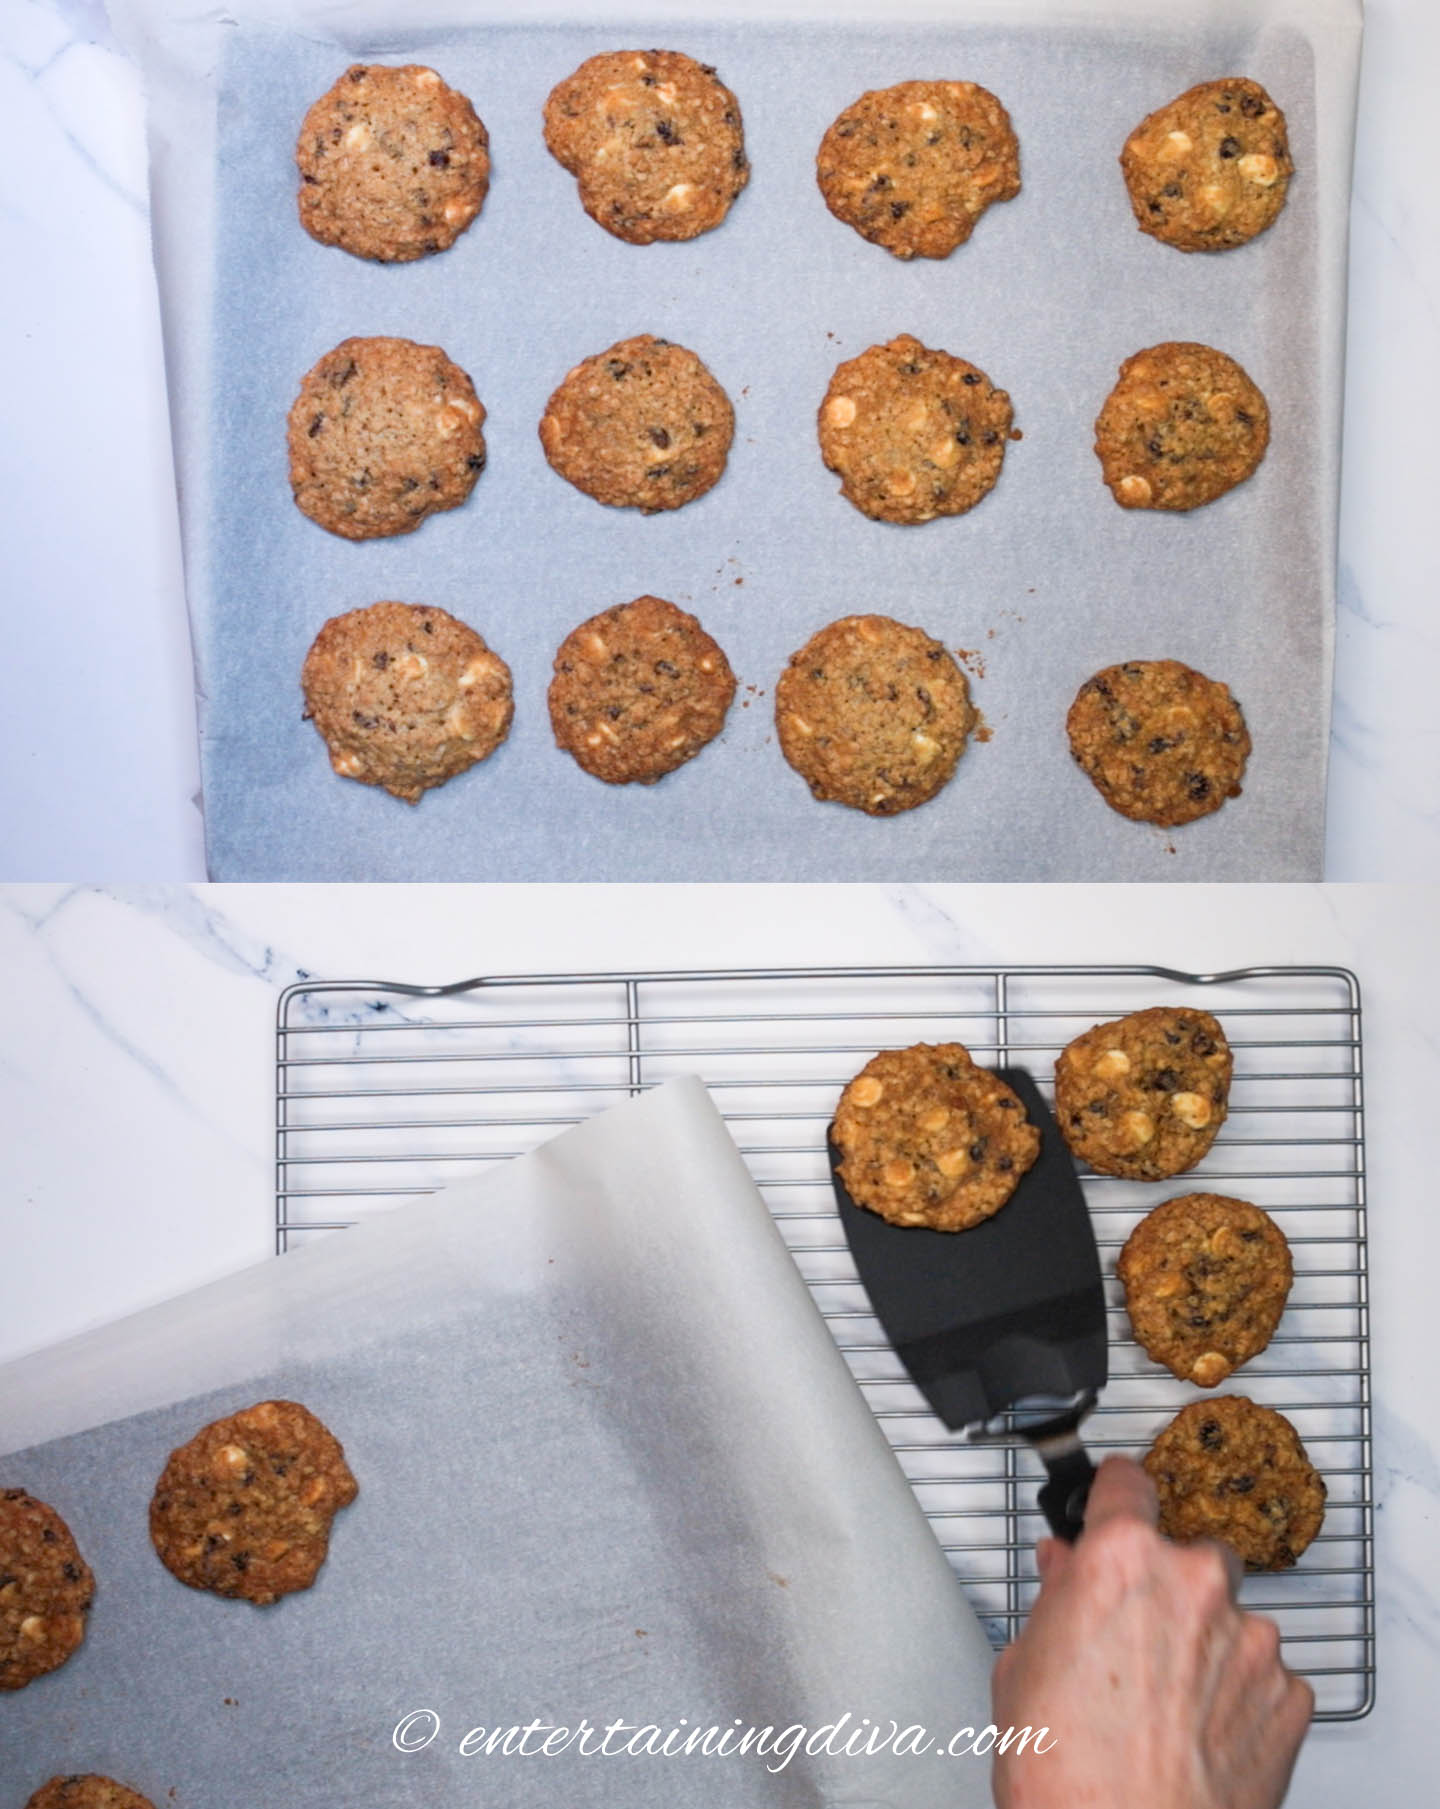 the baked cranberry white chocolate oatmeal cookies on the cookie sheet and on the wire cooling racks